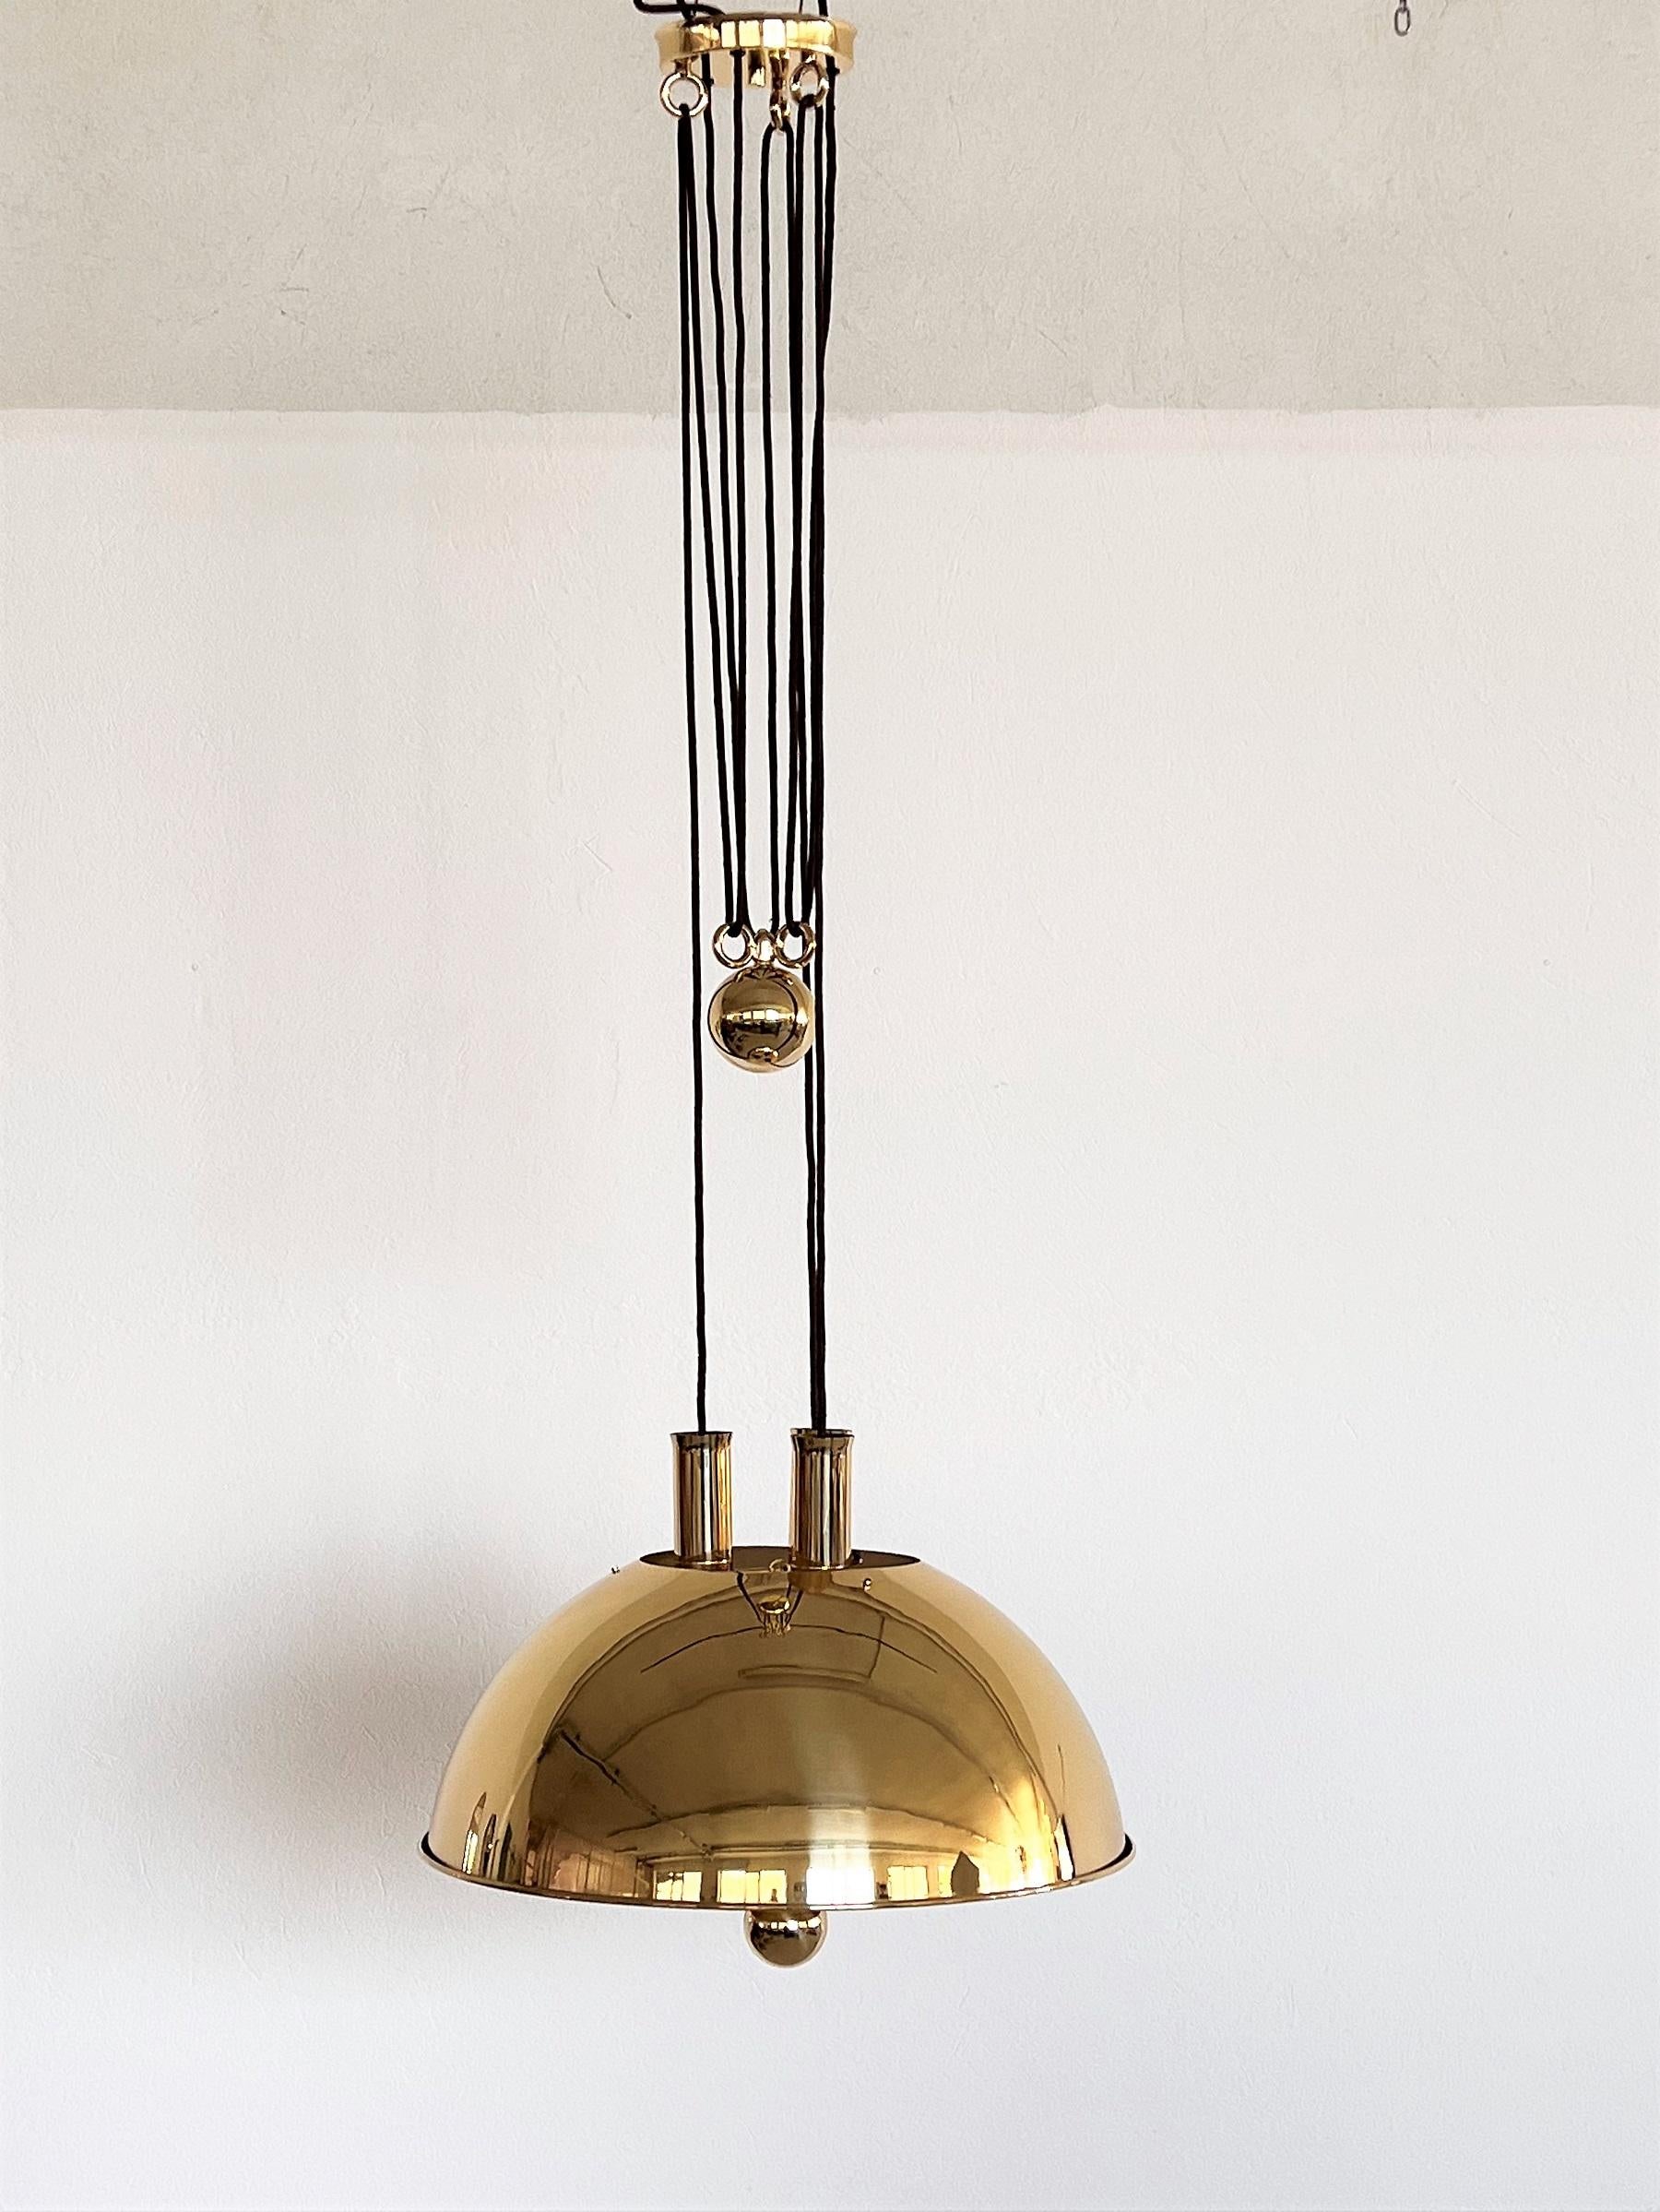 Polished Florian Schulz Rare Counter Balance Vintage Pendant Light in Brass, 1970 For Sale